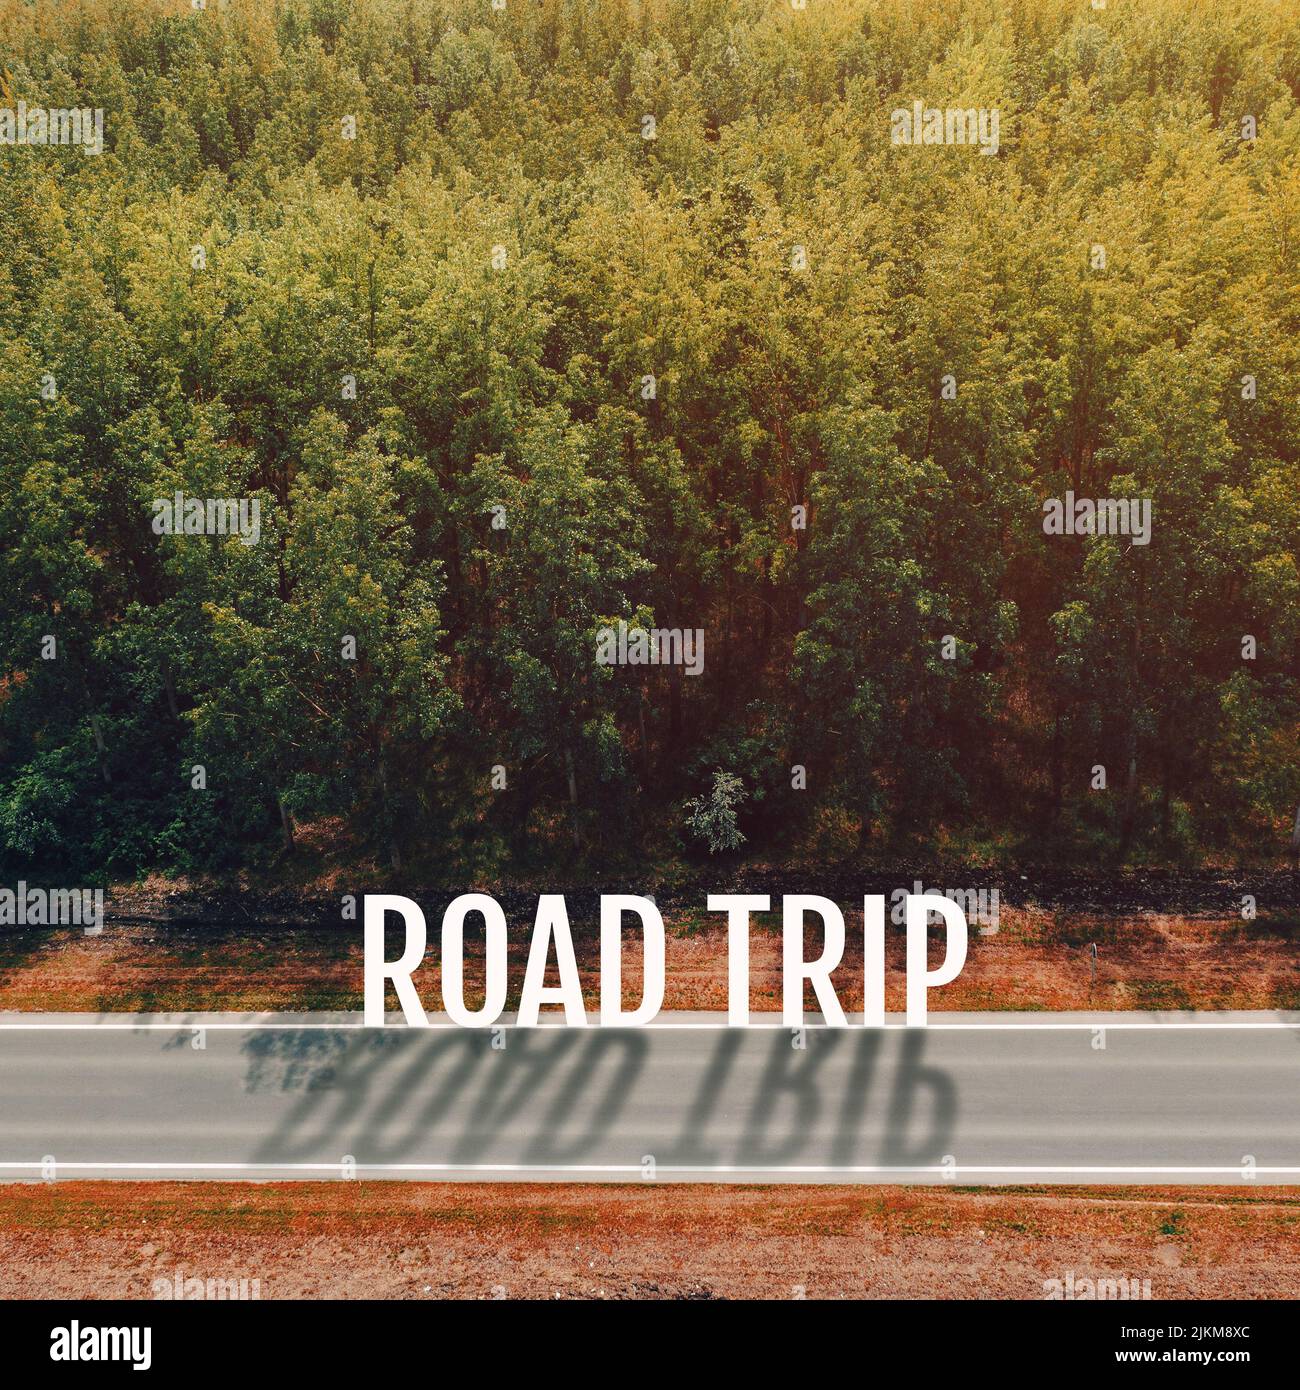 Road trip concept, highway through wooded landscape, aerial view with text Stock Photo